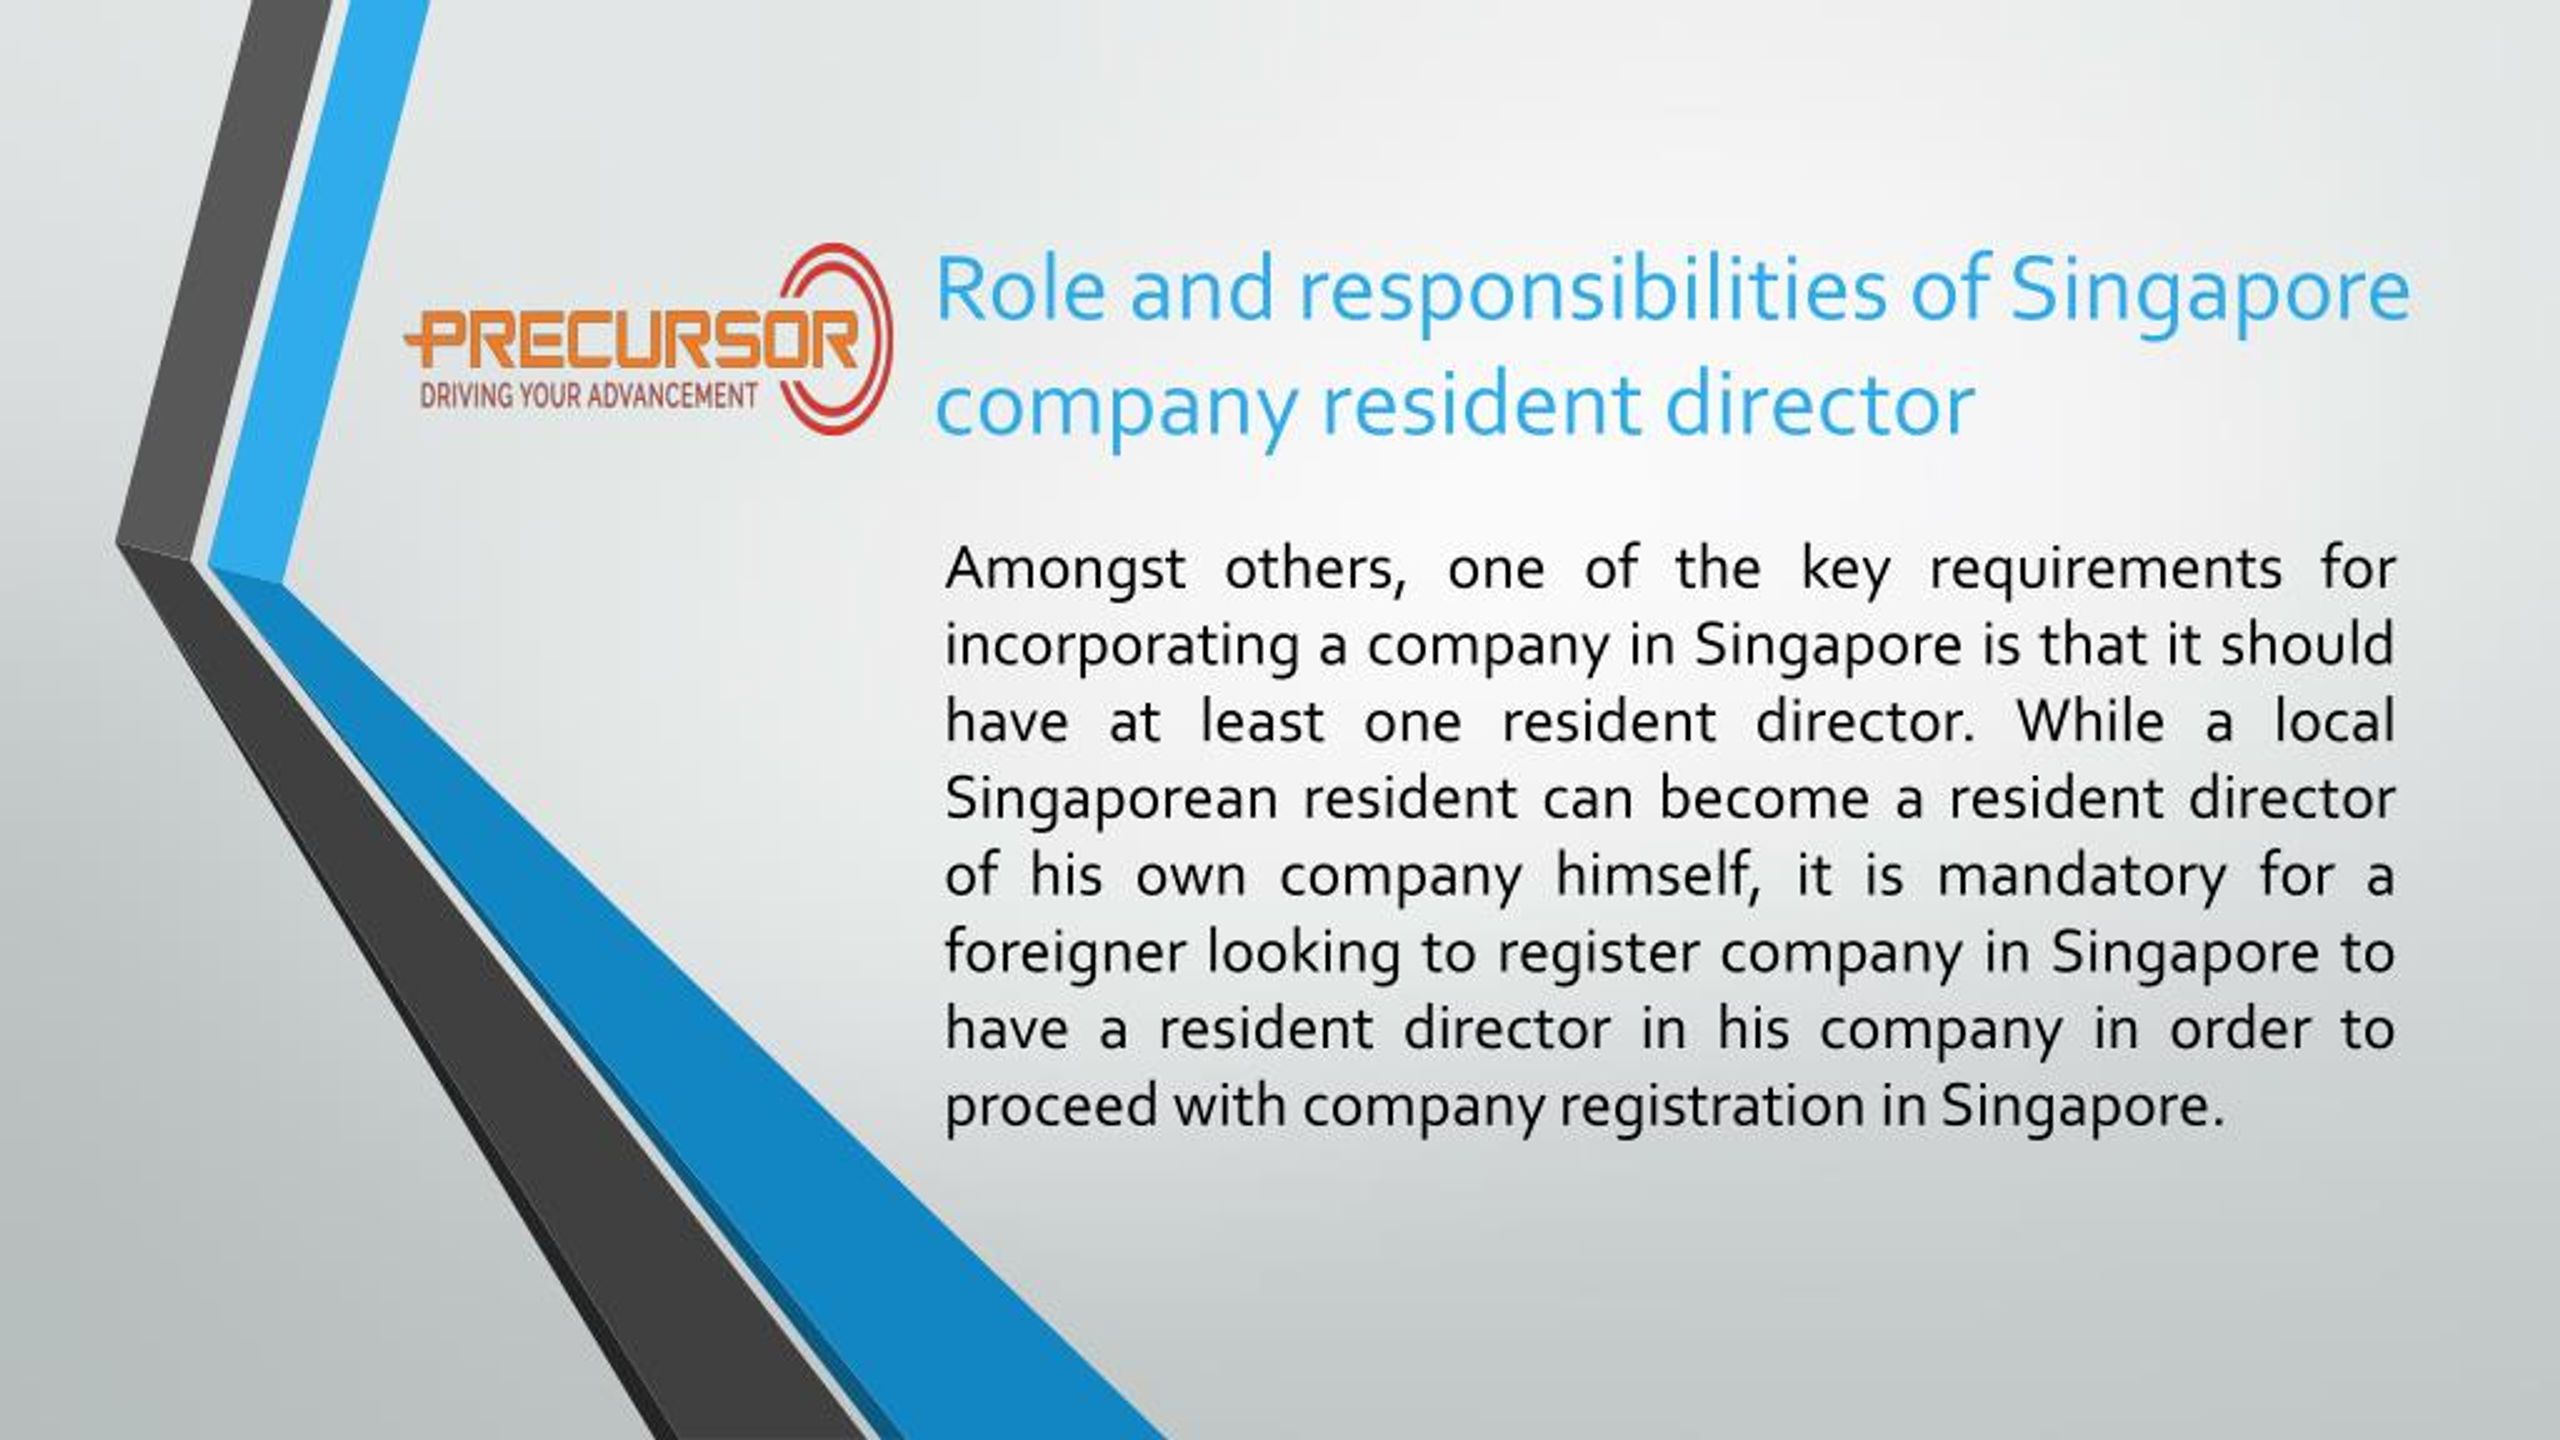 Ppt - Role And Responsibilities Of Singapore Company Resident Director  Powerpoint Presentation - Id:7554092